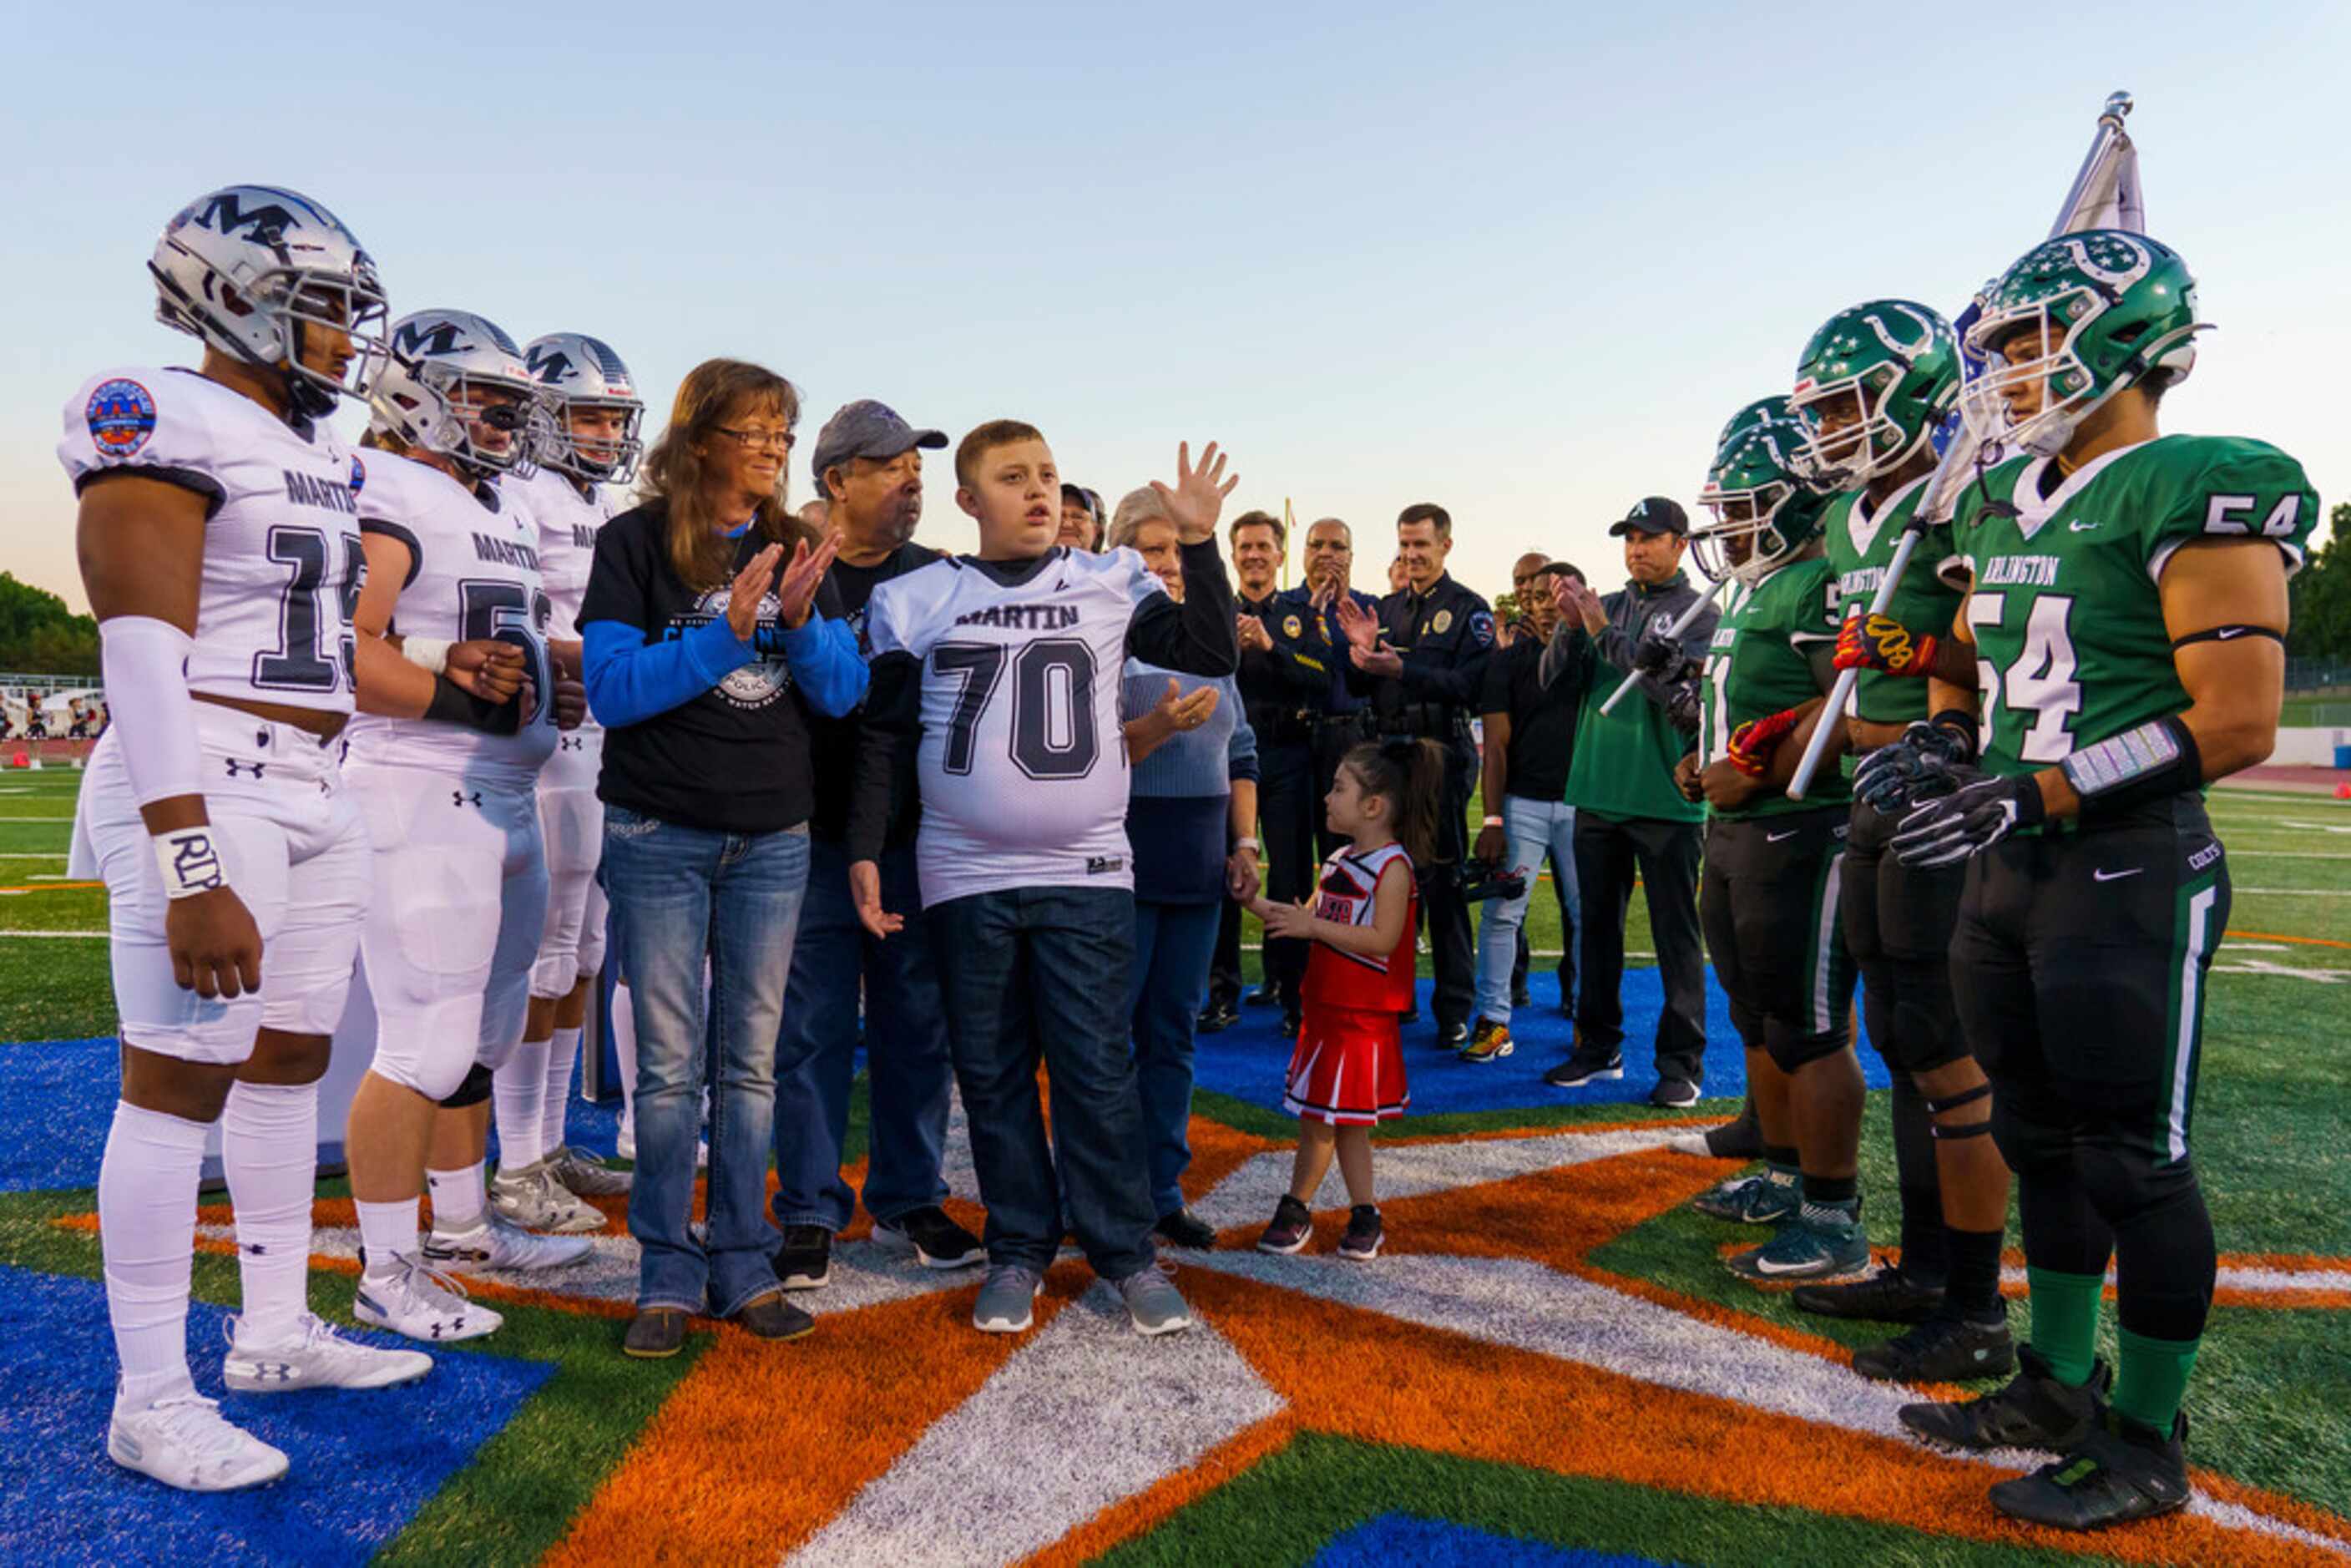 Elisha Castaneda, the son of Grand Prairie police officer A.J. Castaneda, who died in the...